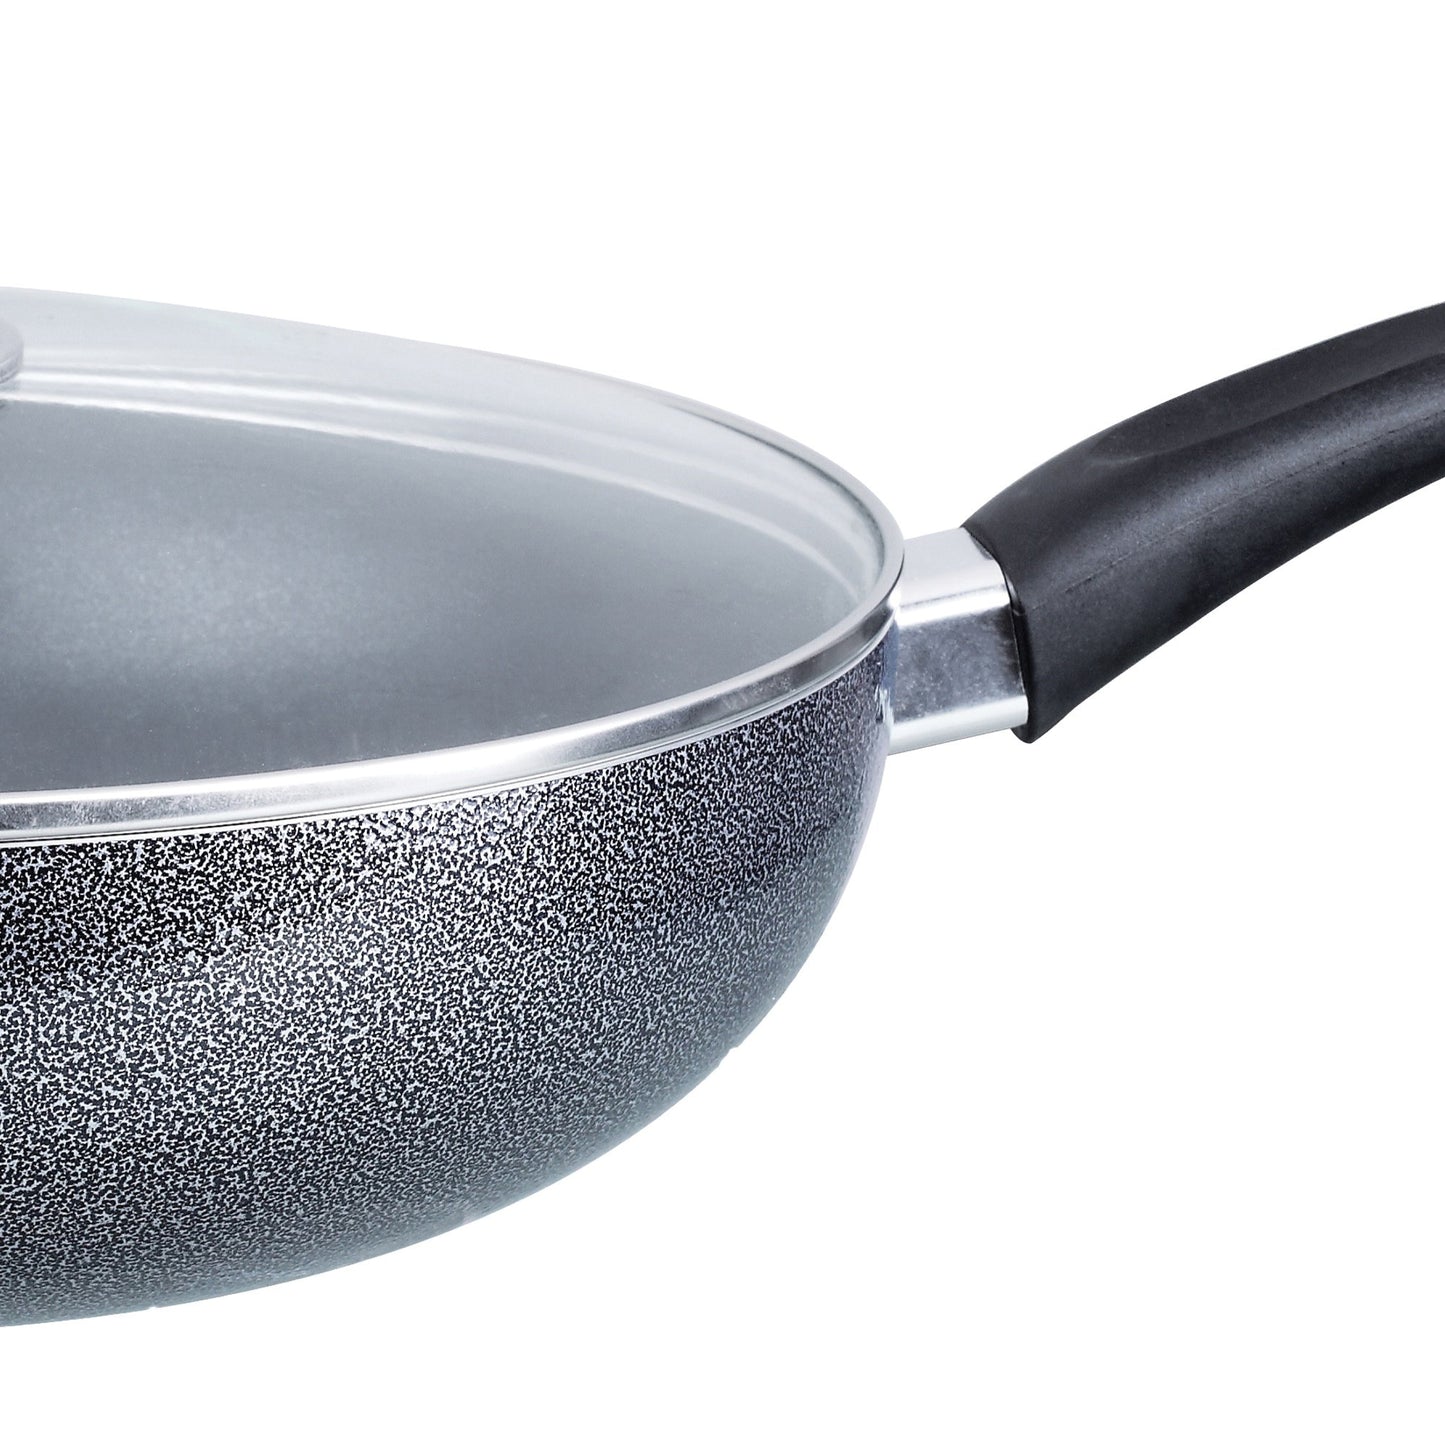 Brentwood Appliances BWL-408 Nonstick Aluminum Wok with Lid (12-Inch)